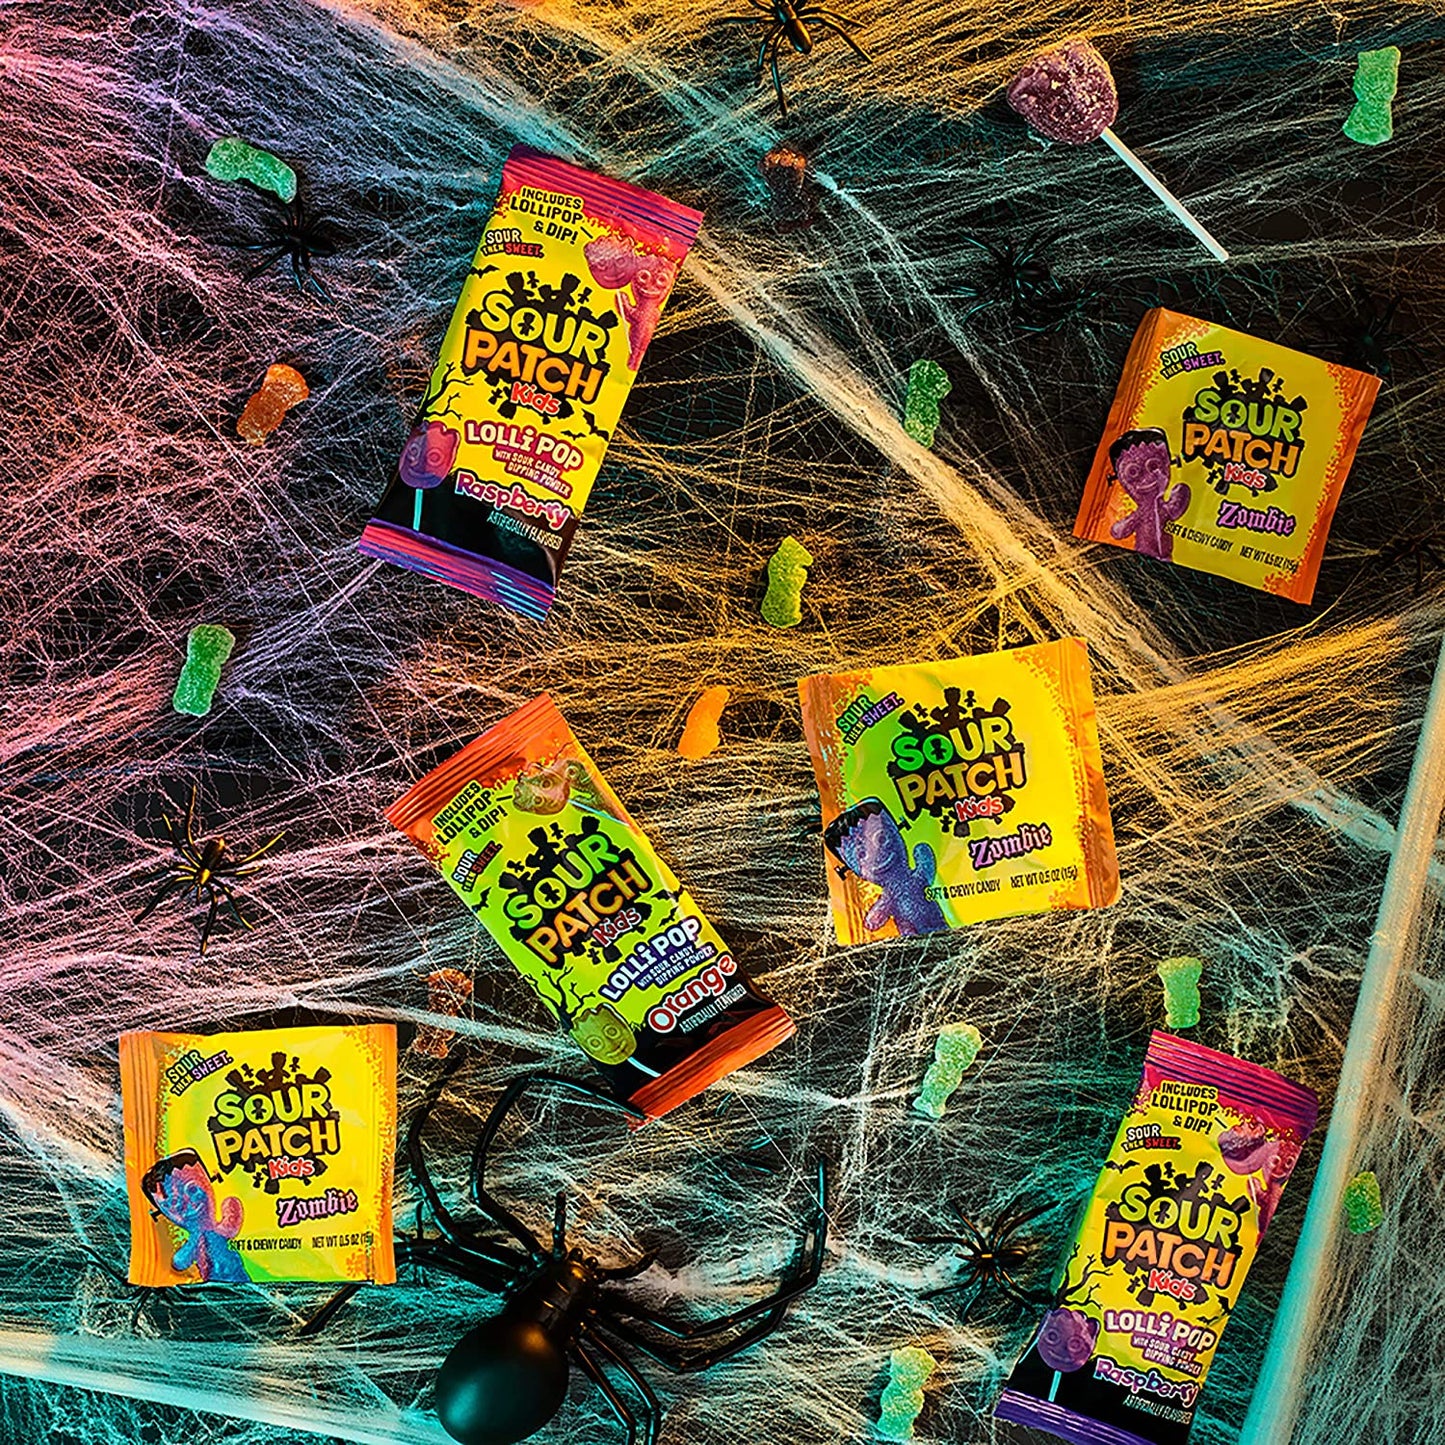 SOUR PATCH KIDS Zombie Orange & Purple Halloween Candy, 80 Trick or Treat Snack Packs